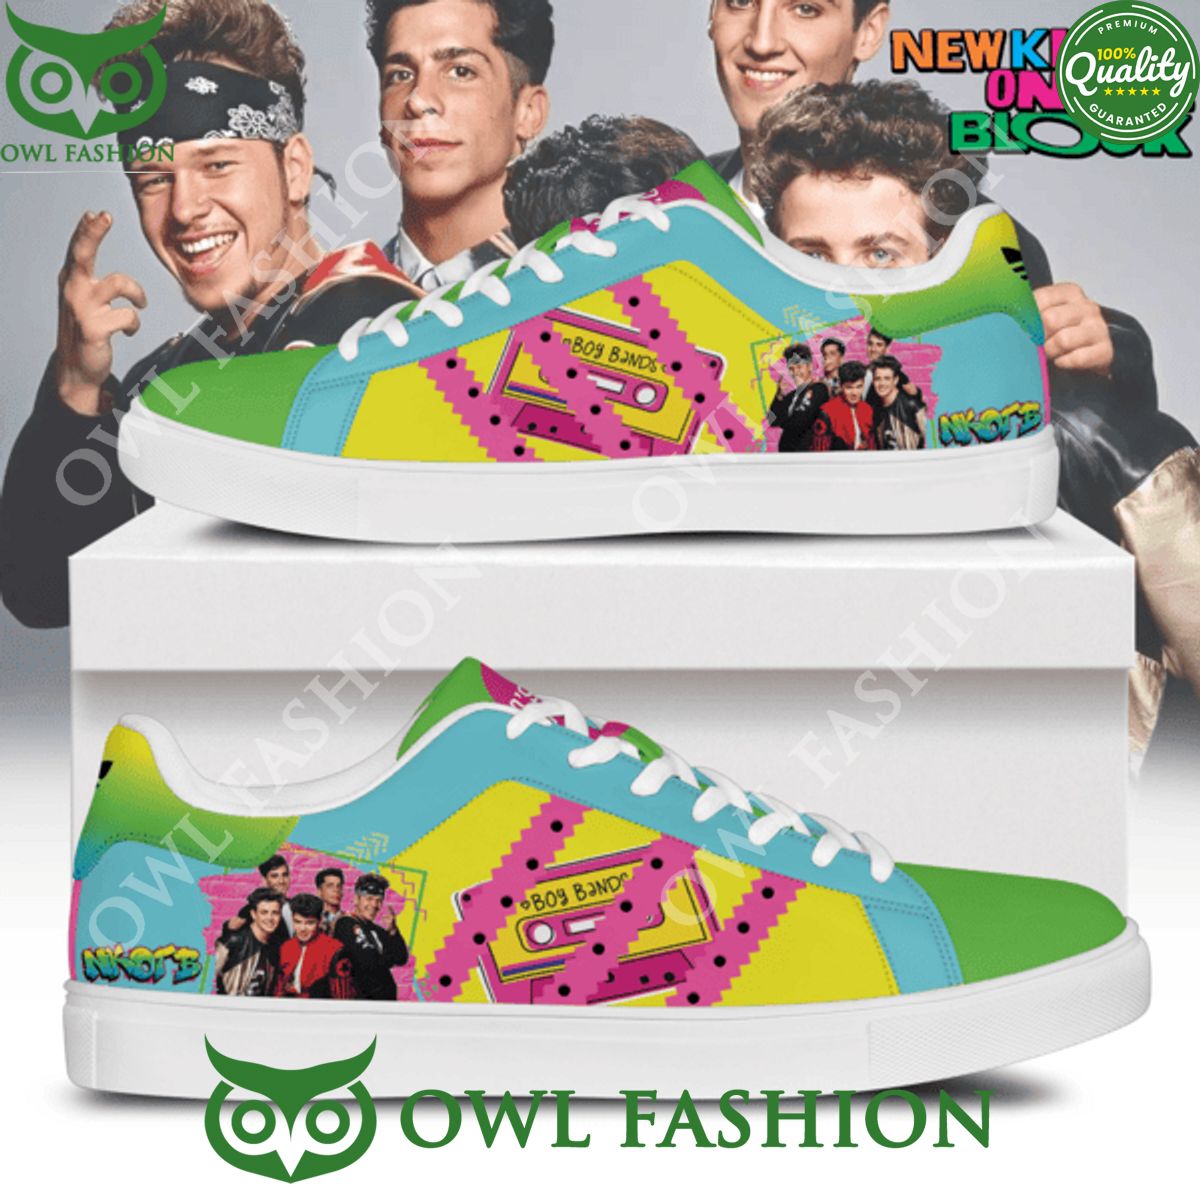 Premium New kids on the Block Boy band Stan smith Shoes